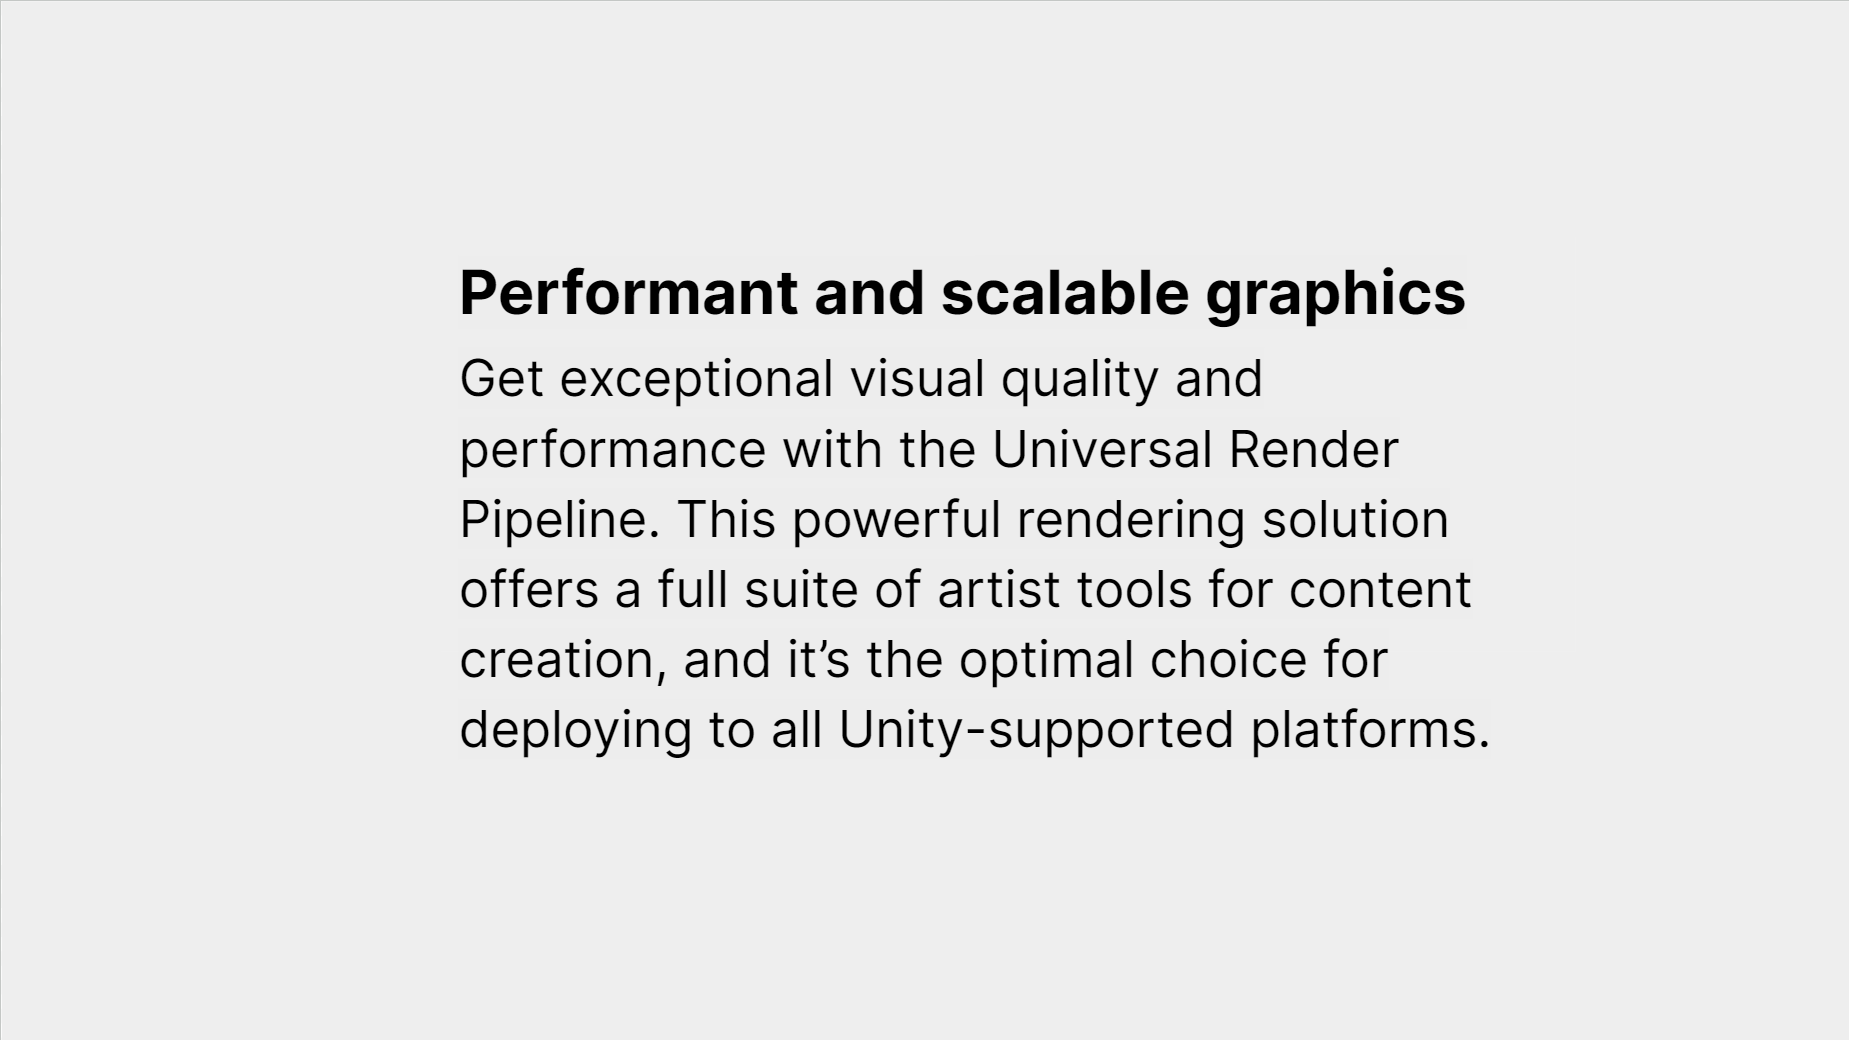 Unity for HMI benefit: performant and scalable graphics